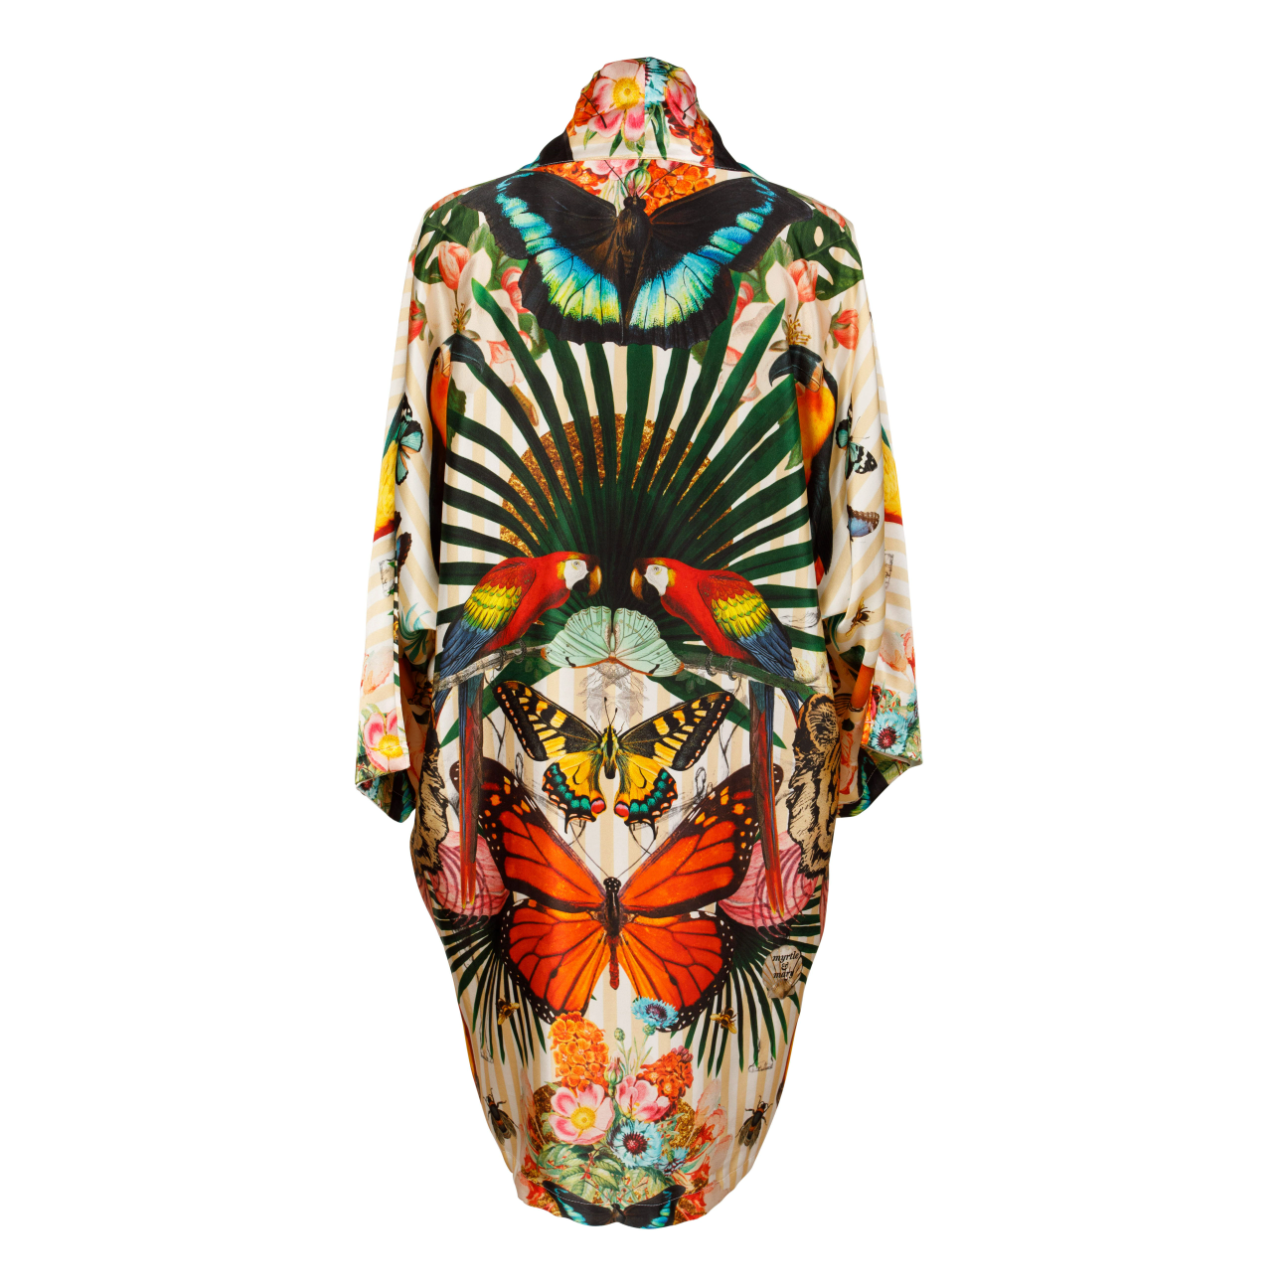 Back view of a luxury 100% silk Kimono in a maximalist tropical inspired design against a pale background